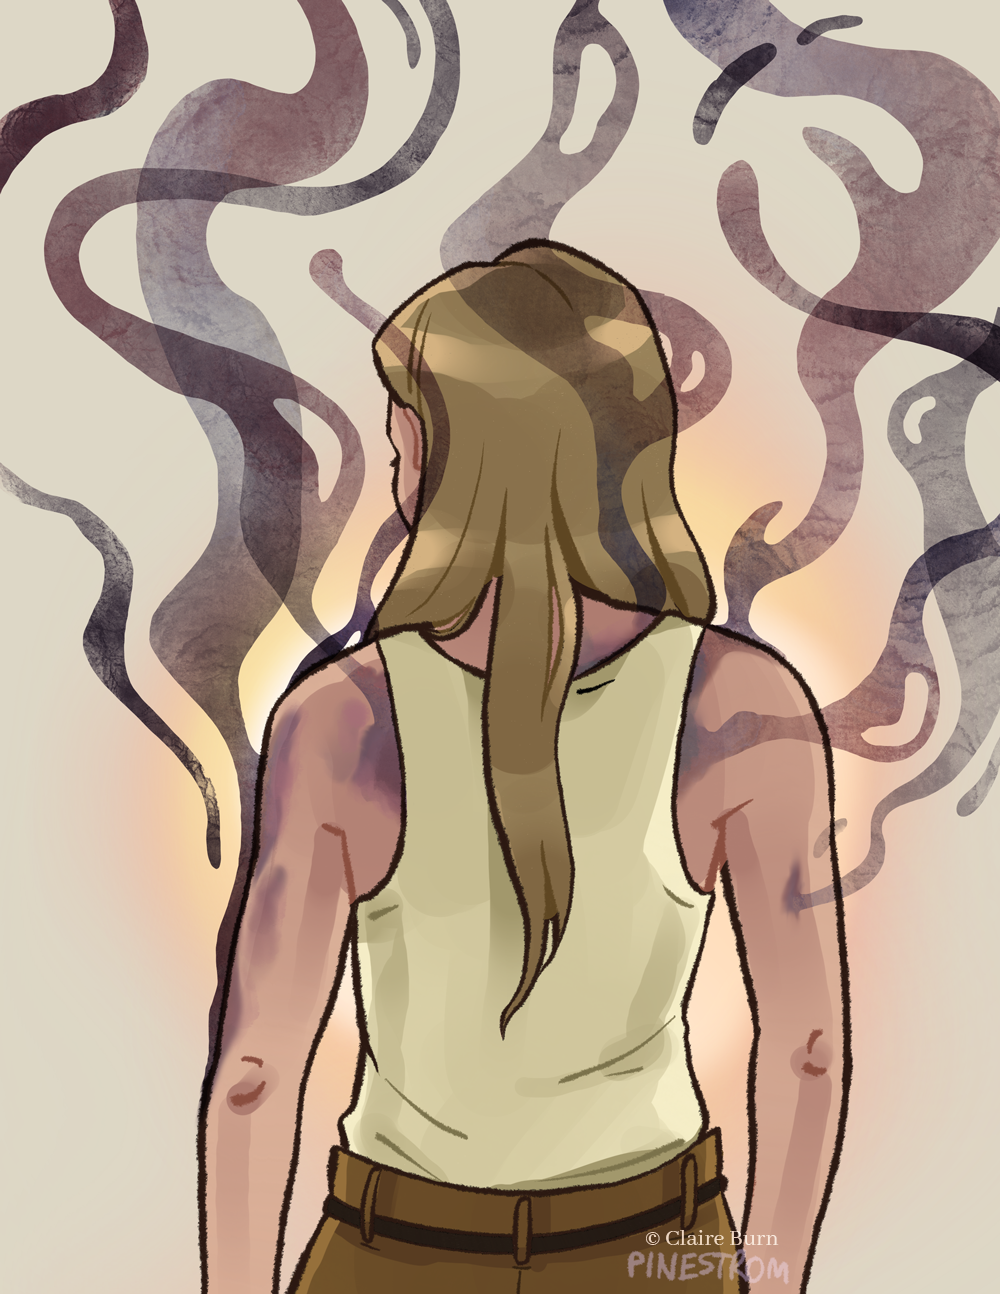 Illustration of a woman with long blonde hair, viewed from the back. She has bruises on her upper body that are emitting smoke.